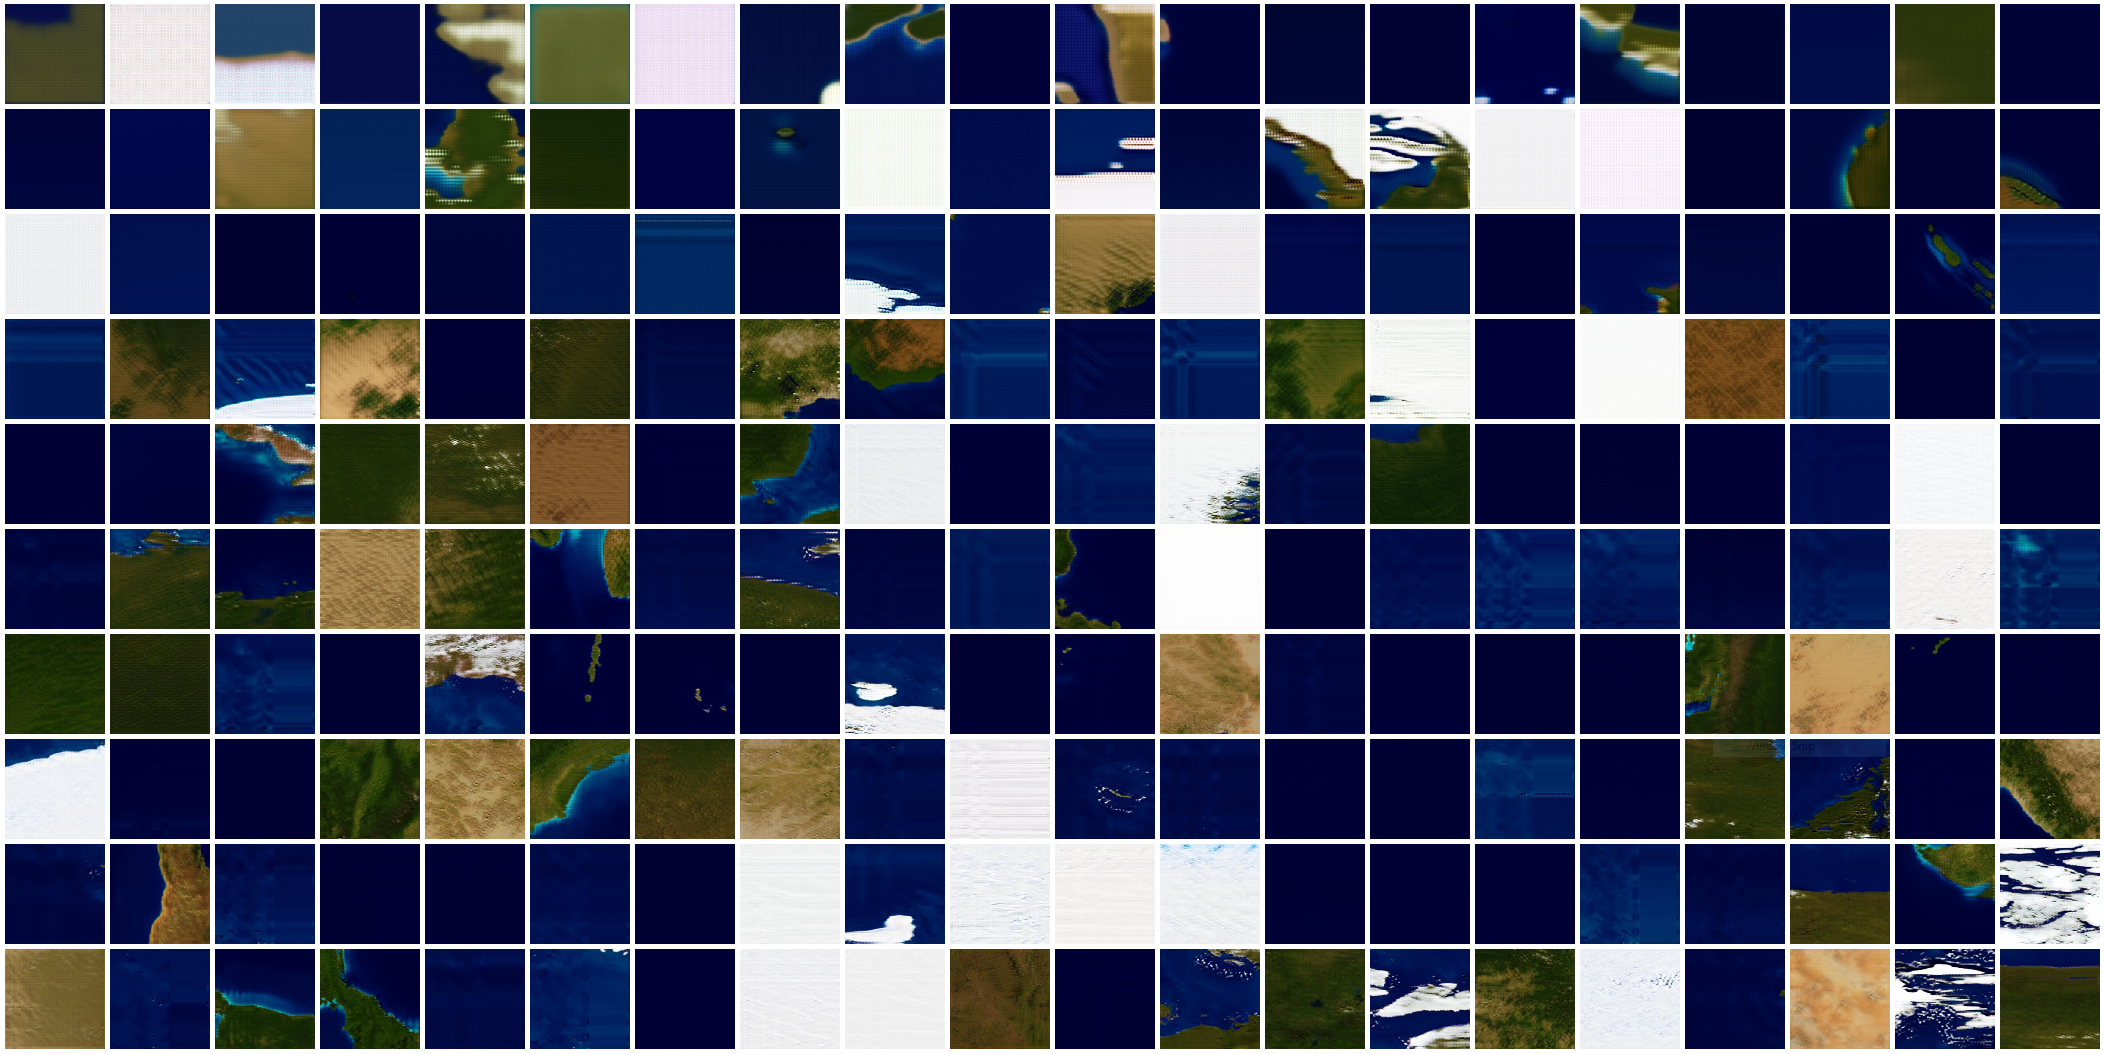  Sample results demonstrating the training process of  Terra Mars  generation 65, with each tile representing the quality of the generated images during one of the 200 epochs of training. In the beginning, the generated images didn't look like Earth 